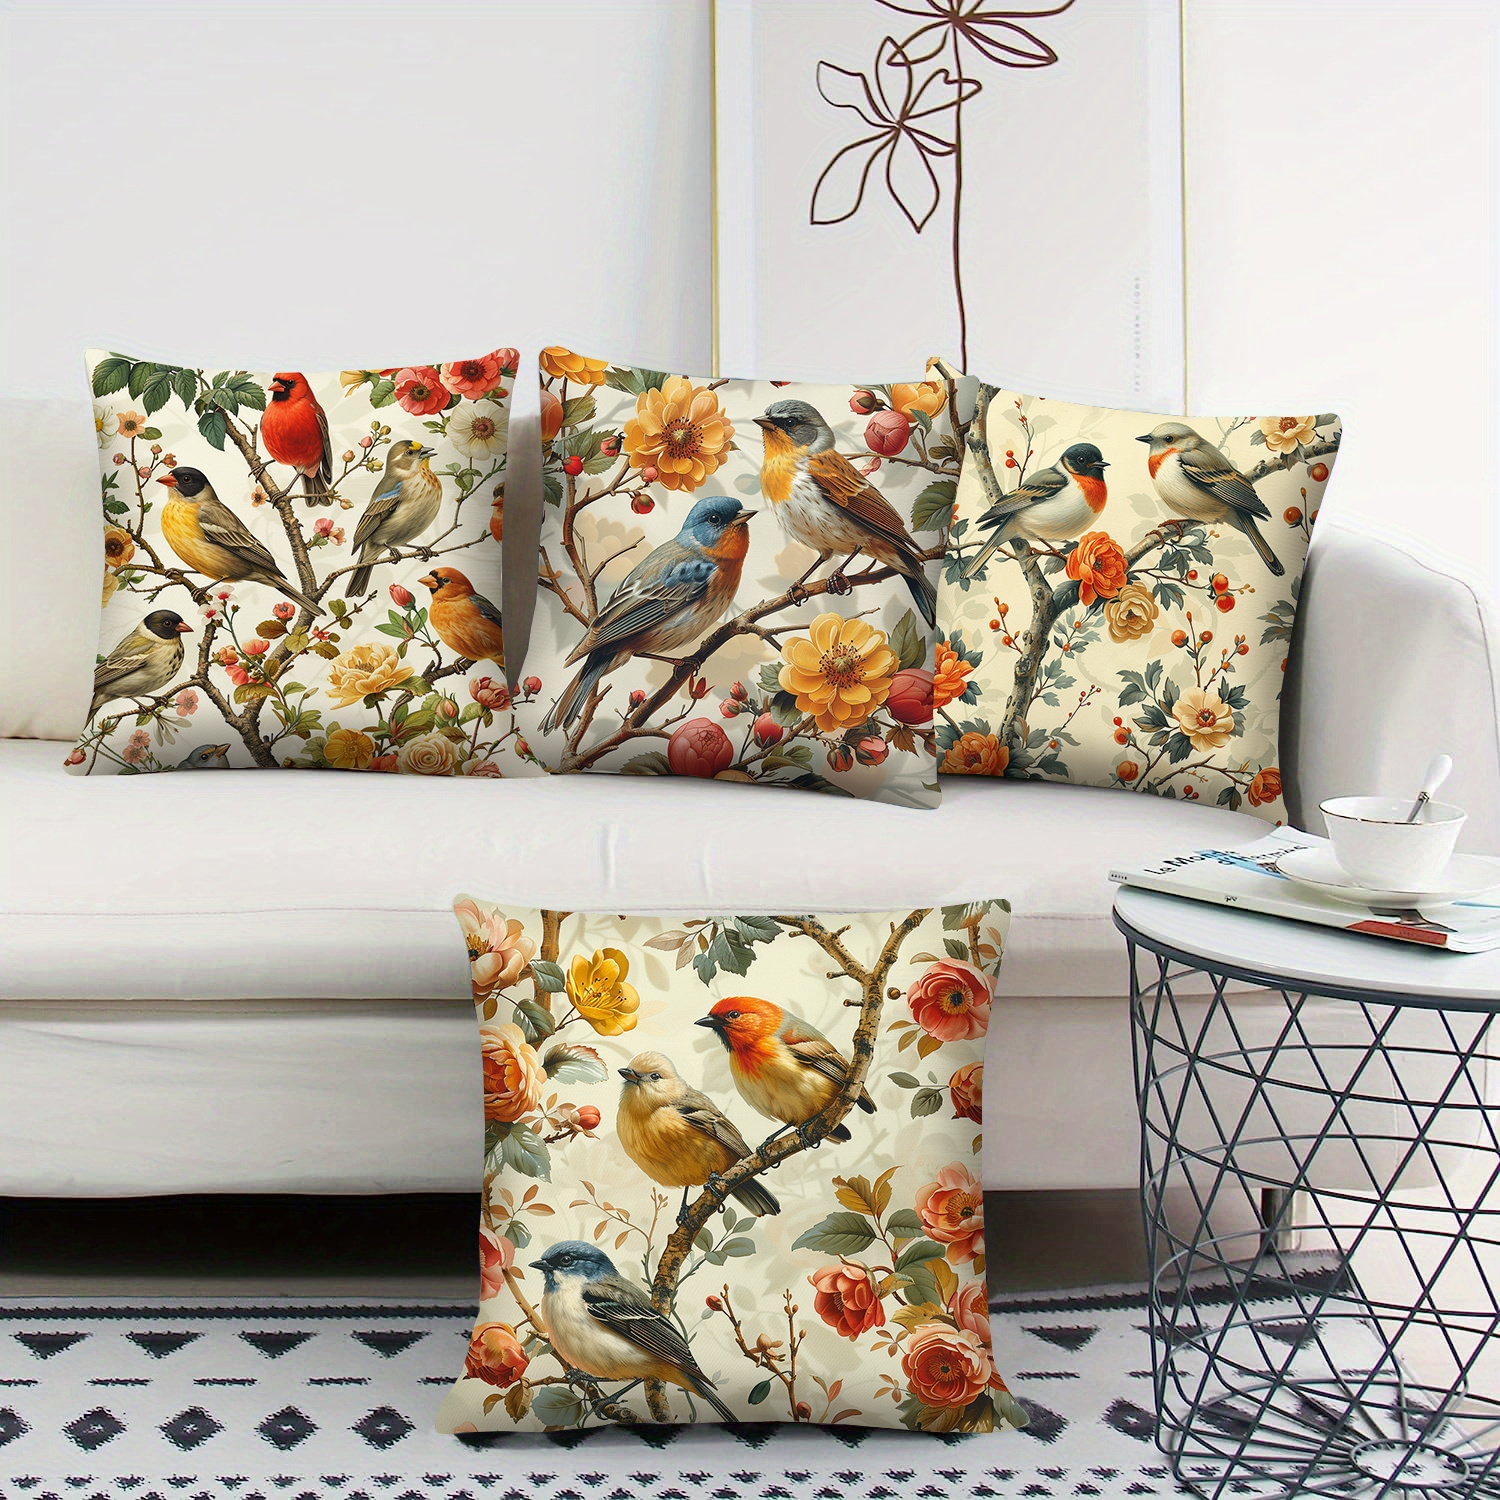 

Set Of 4 Decorative Pillow Covers With Winter Birds And Floral Pattern, 100% Polyester Woven Contemporary Style, Zippered Throw Pillow Cases For Various Room Types, Machine Washable - 18x18 Inch